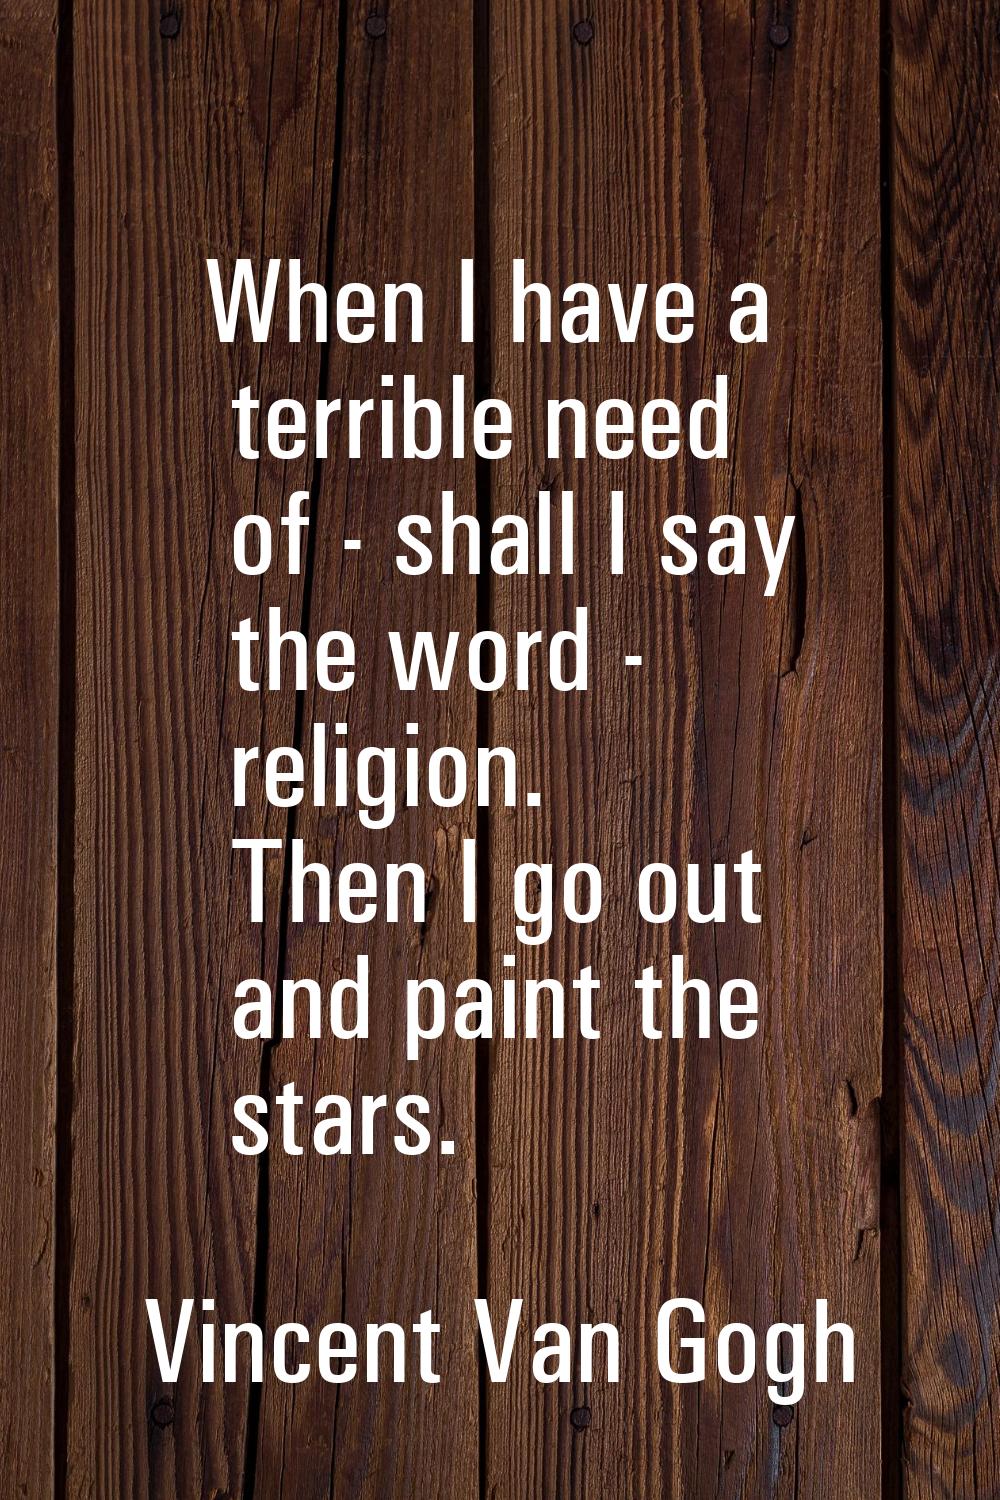 When I have a terrible need of - shall I say the word - religion. Then I go out and paint the stars